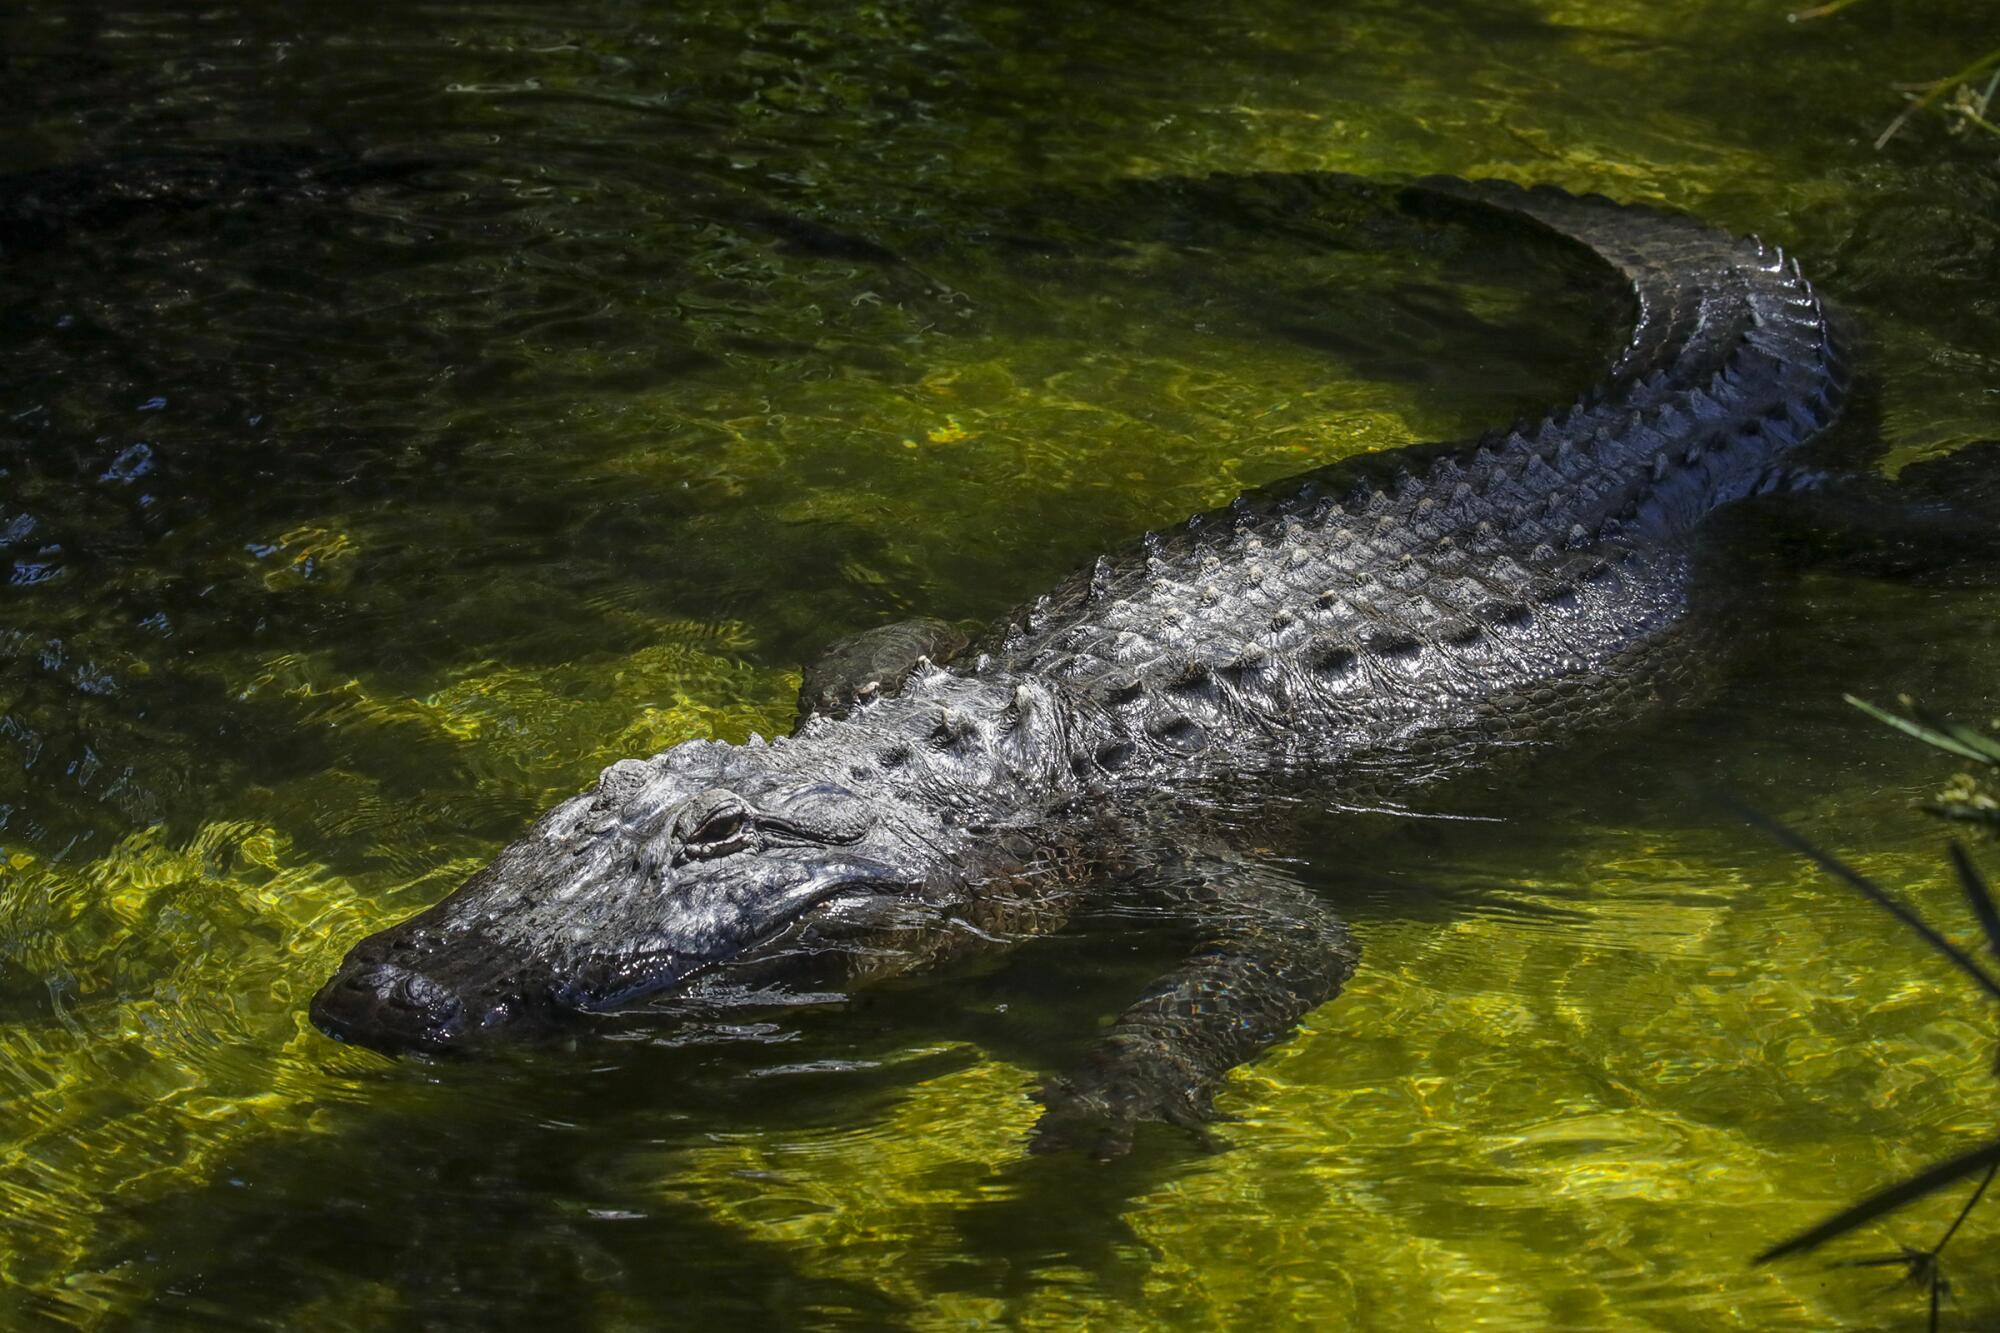 A large alligator floats in green-tinted water